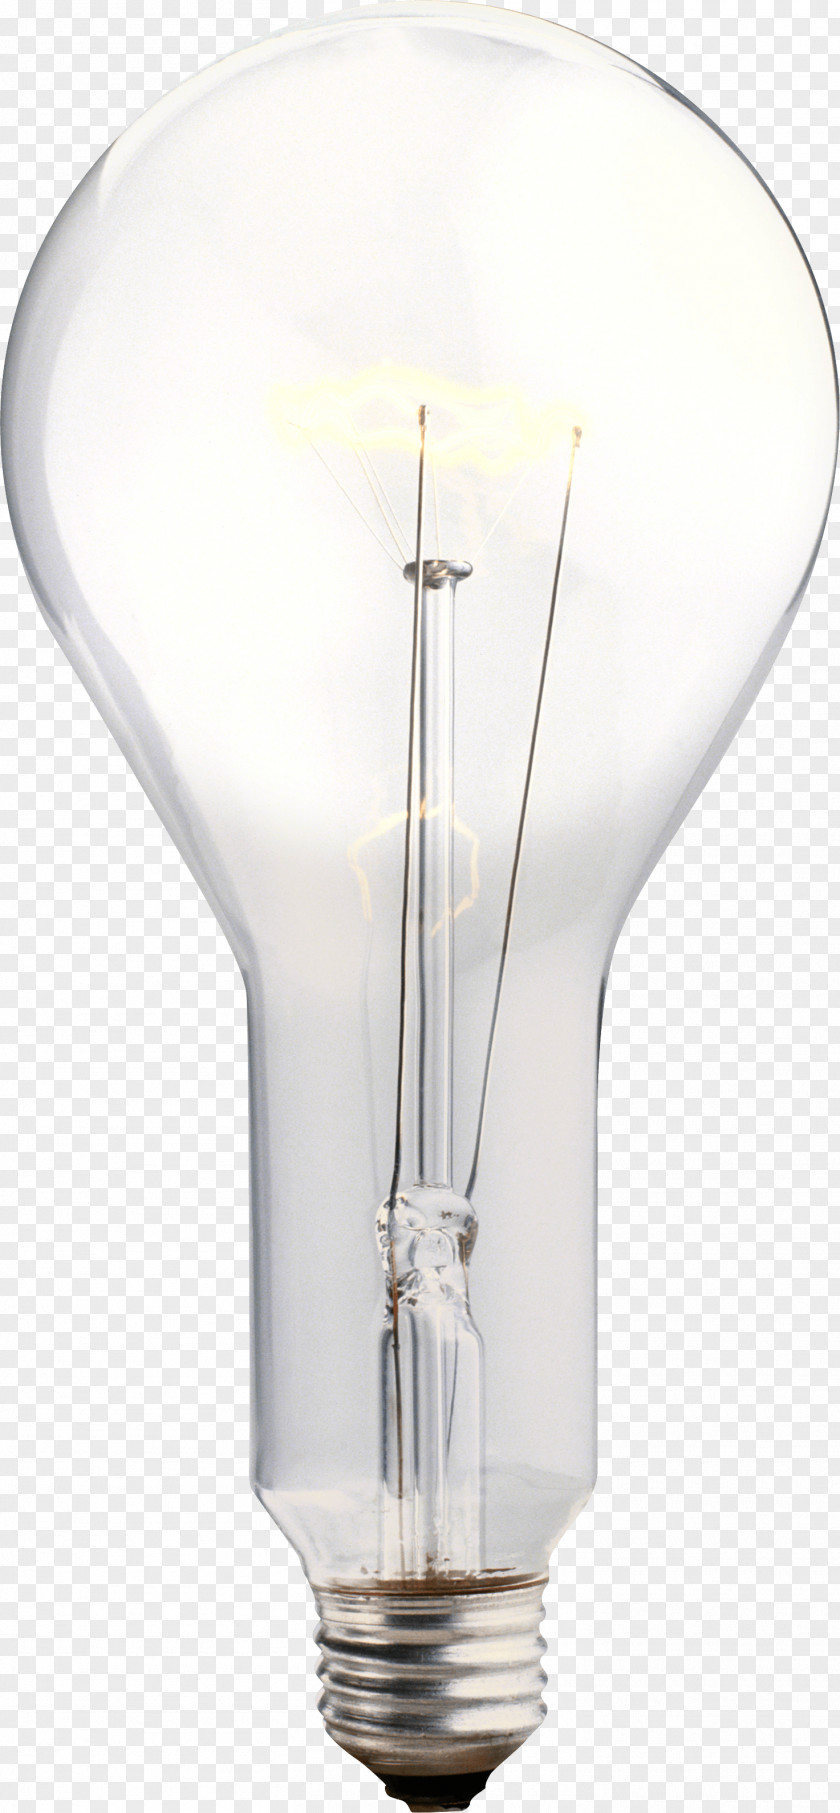 Lamp Image Incandescent Light Bulb Electricity PNG